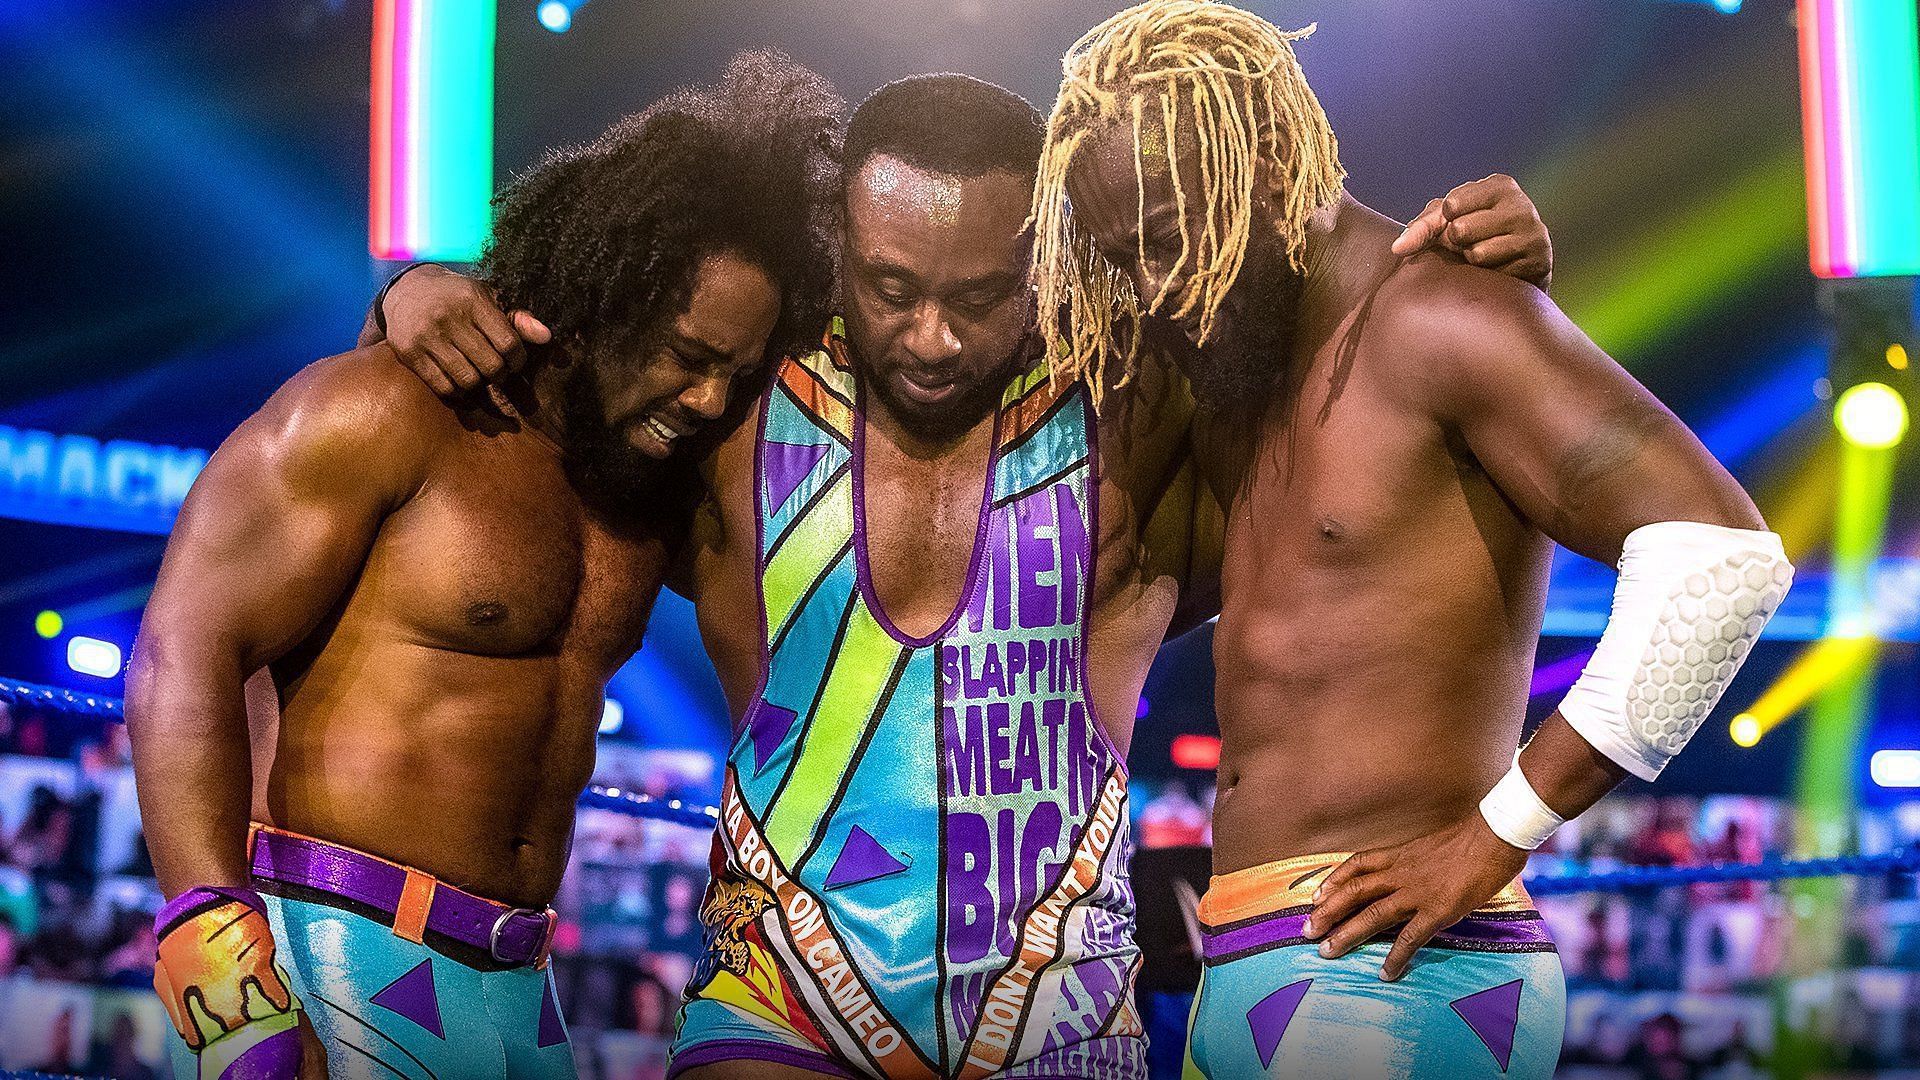 The New Day is one of the most beloved tag teams in WWE.